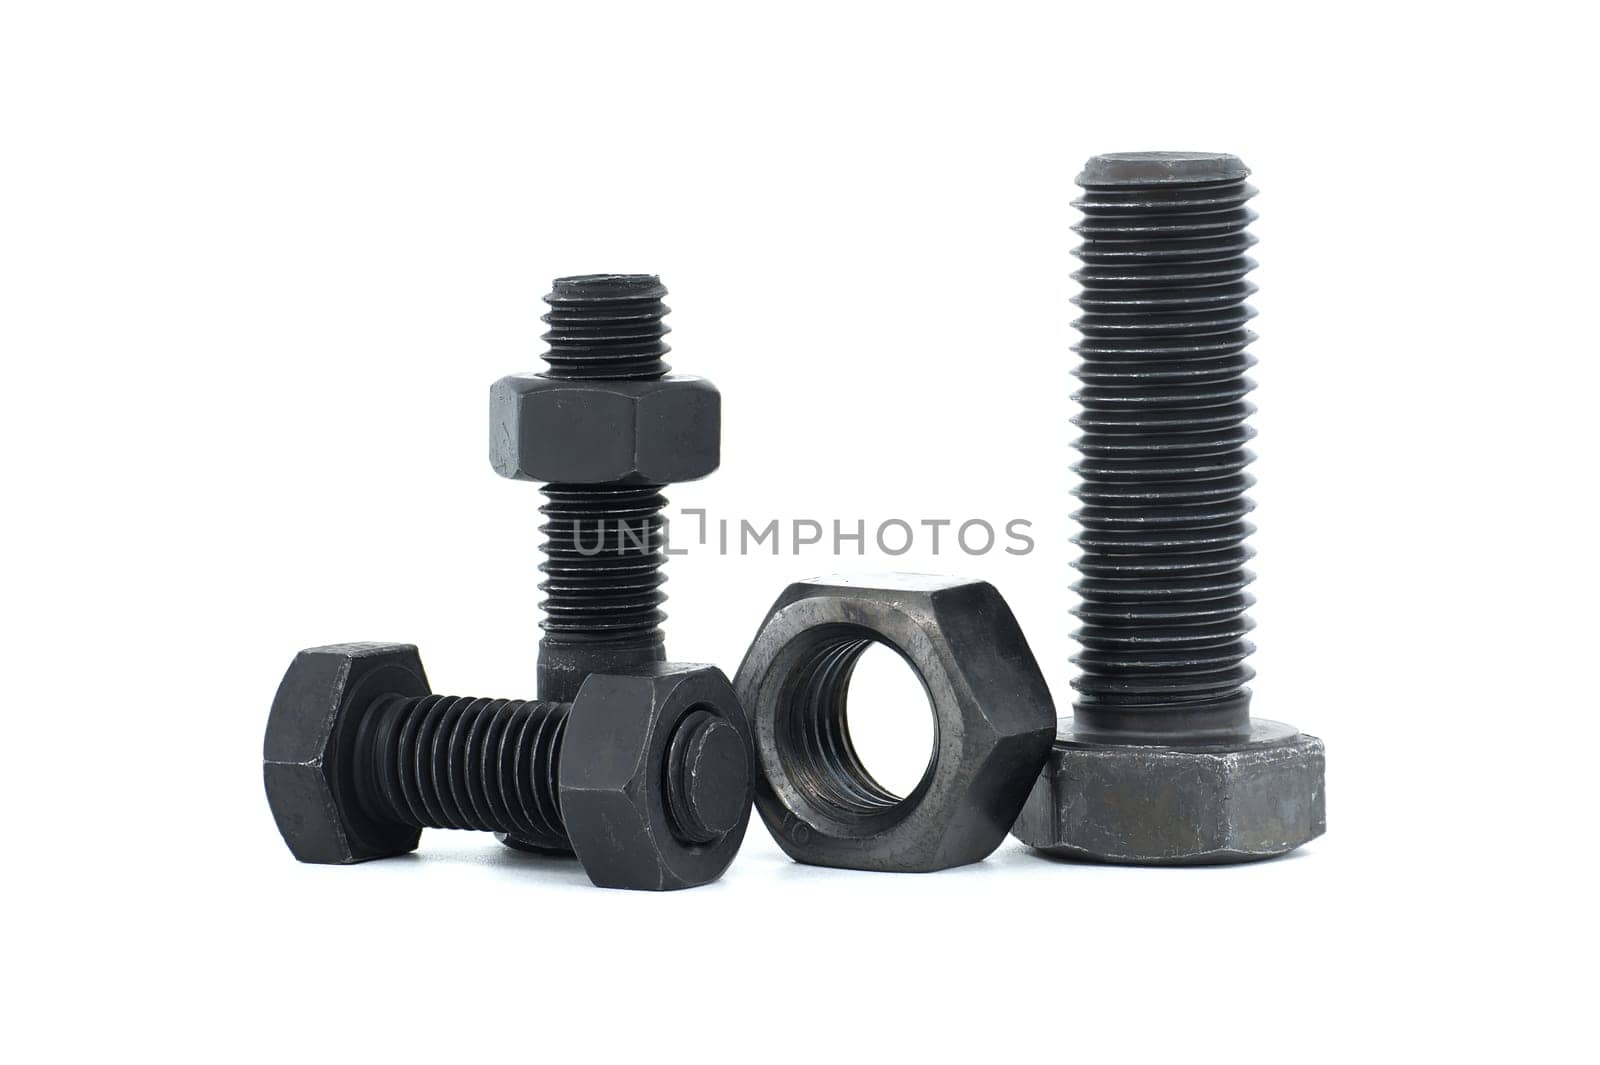 Orderly arrangement of dark-colored metal of hex bolts and nuts include long and shorter parts, placed against a clean, white background